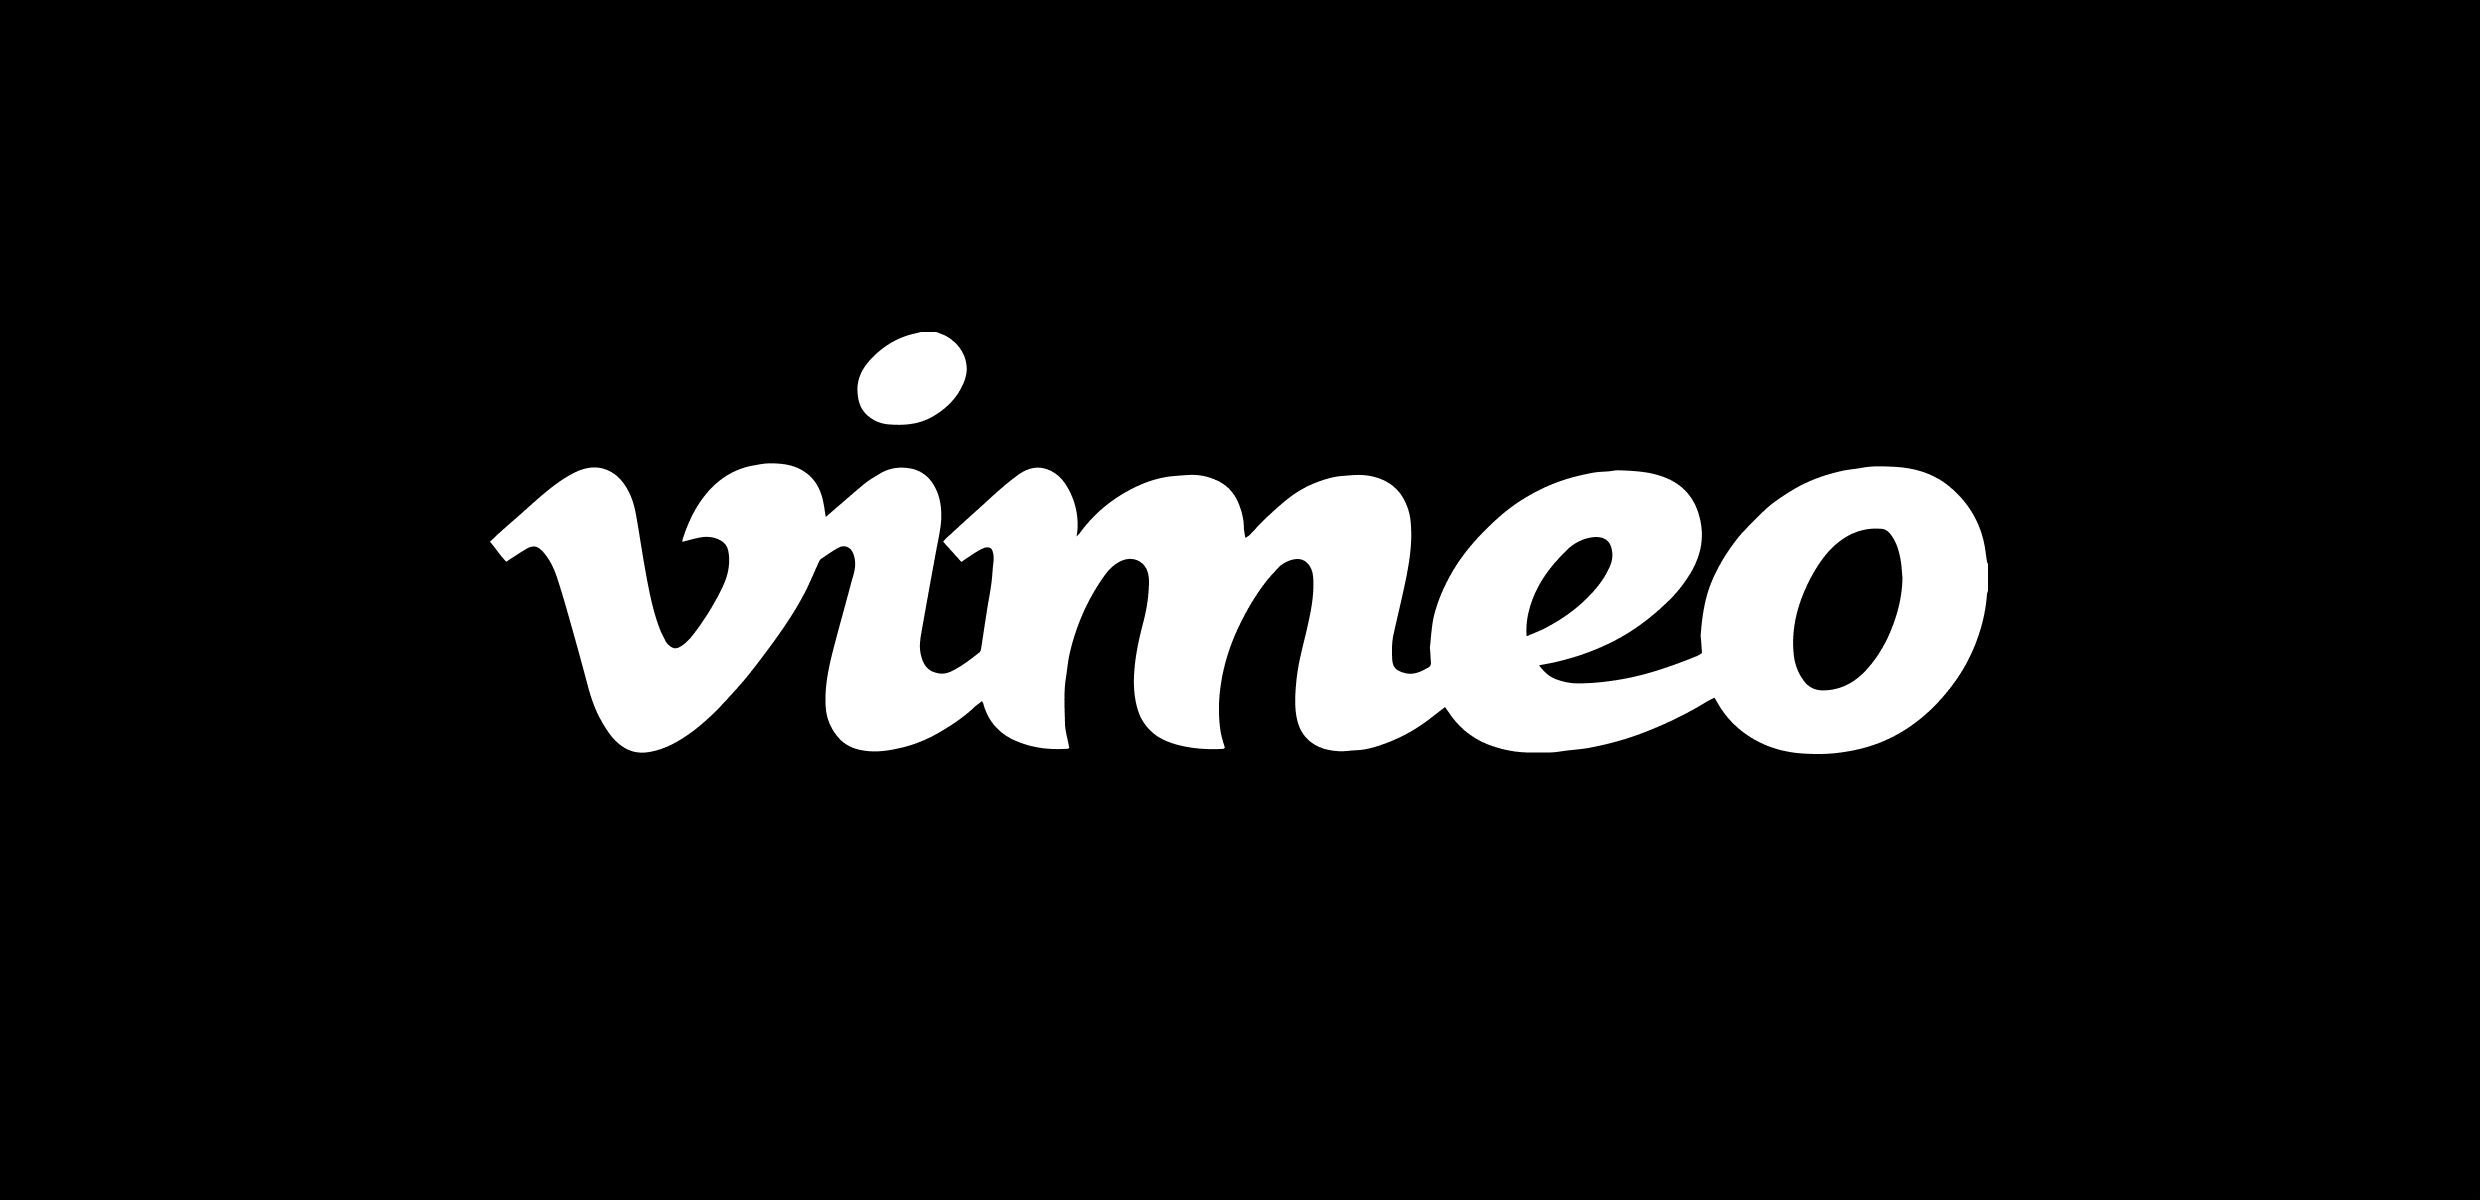 Even if you like YouTube, you should still add Vimeo to your list. Vimeo also offers some TV series and supports 360-degree videos. The site has an easy-to-browse search feature that organizes videos by category and channel. While YouTube is the most popular video-sharing platform, Vimeo remains one of the top best alternatives. Unlike other video-sharing sites, Vimeo doesn’t feature advertisements. Vimeo uploaders now primarily focus on earning through their clips by a ‘Clip-on-demand’ model. Their site is great for anyone who would like to get the word out about their business.